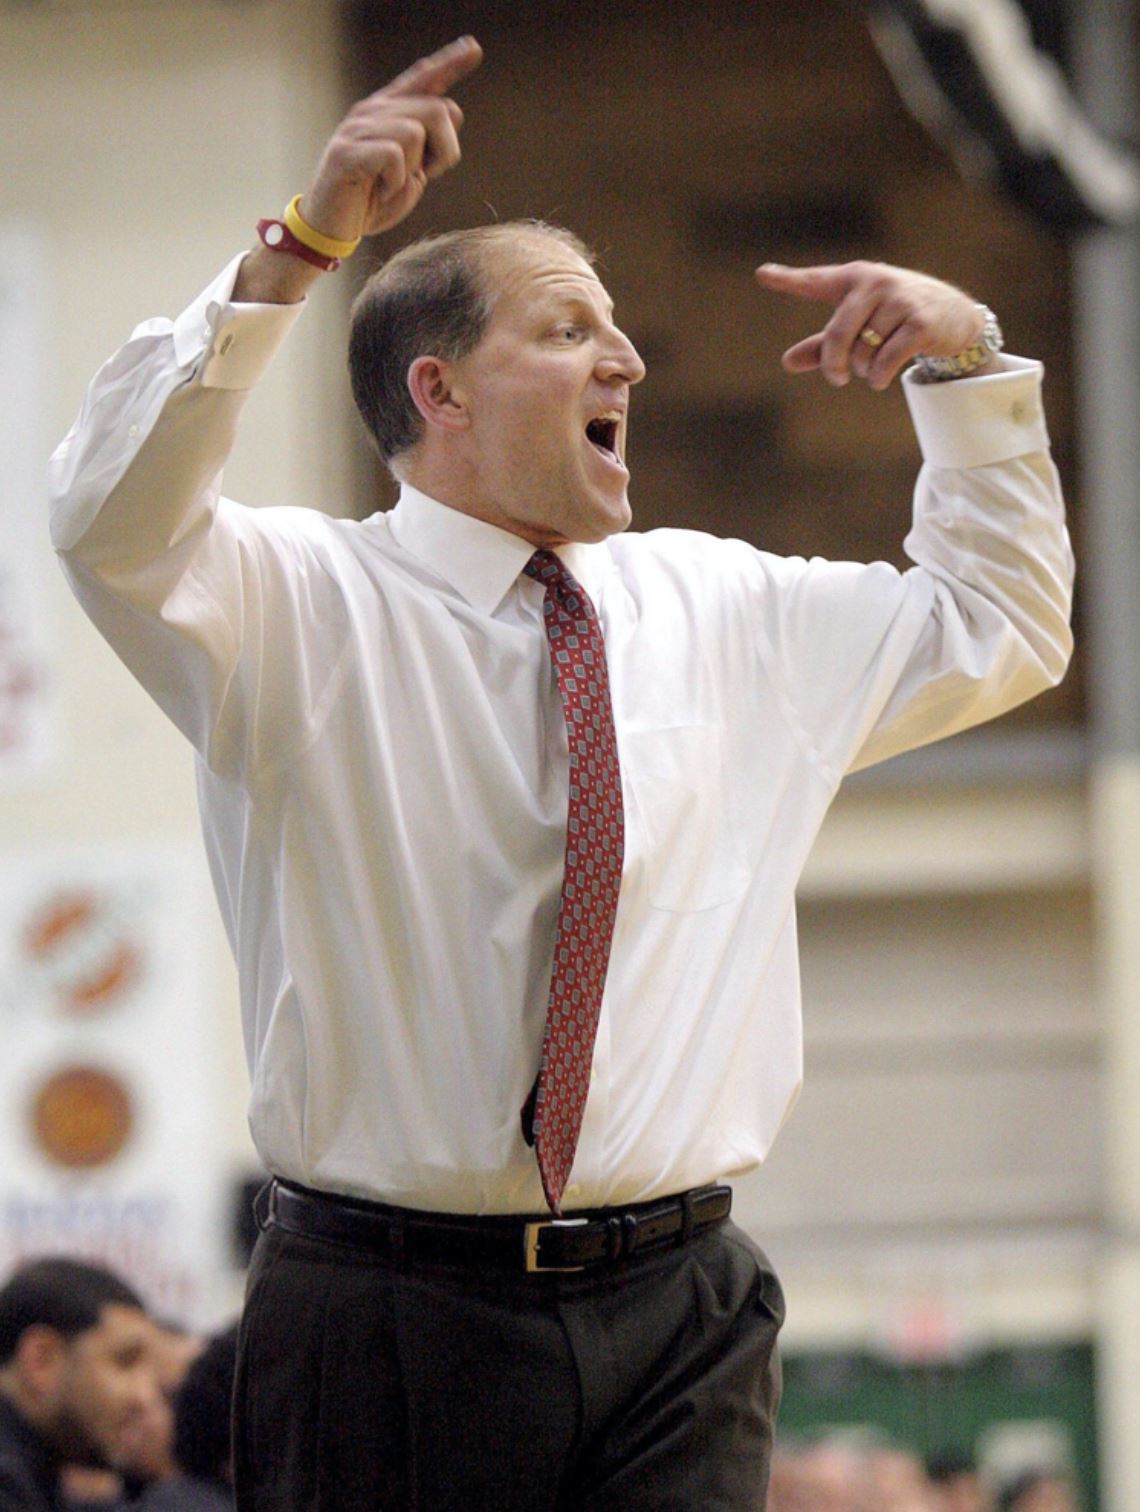 The Providence Journal photo - Coach Psaras at a game